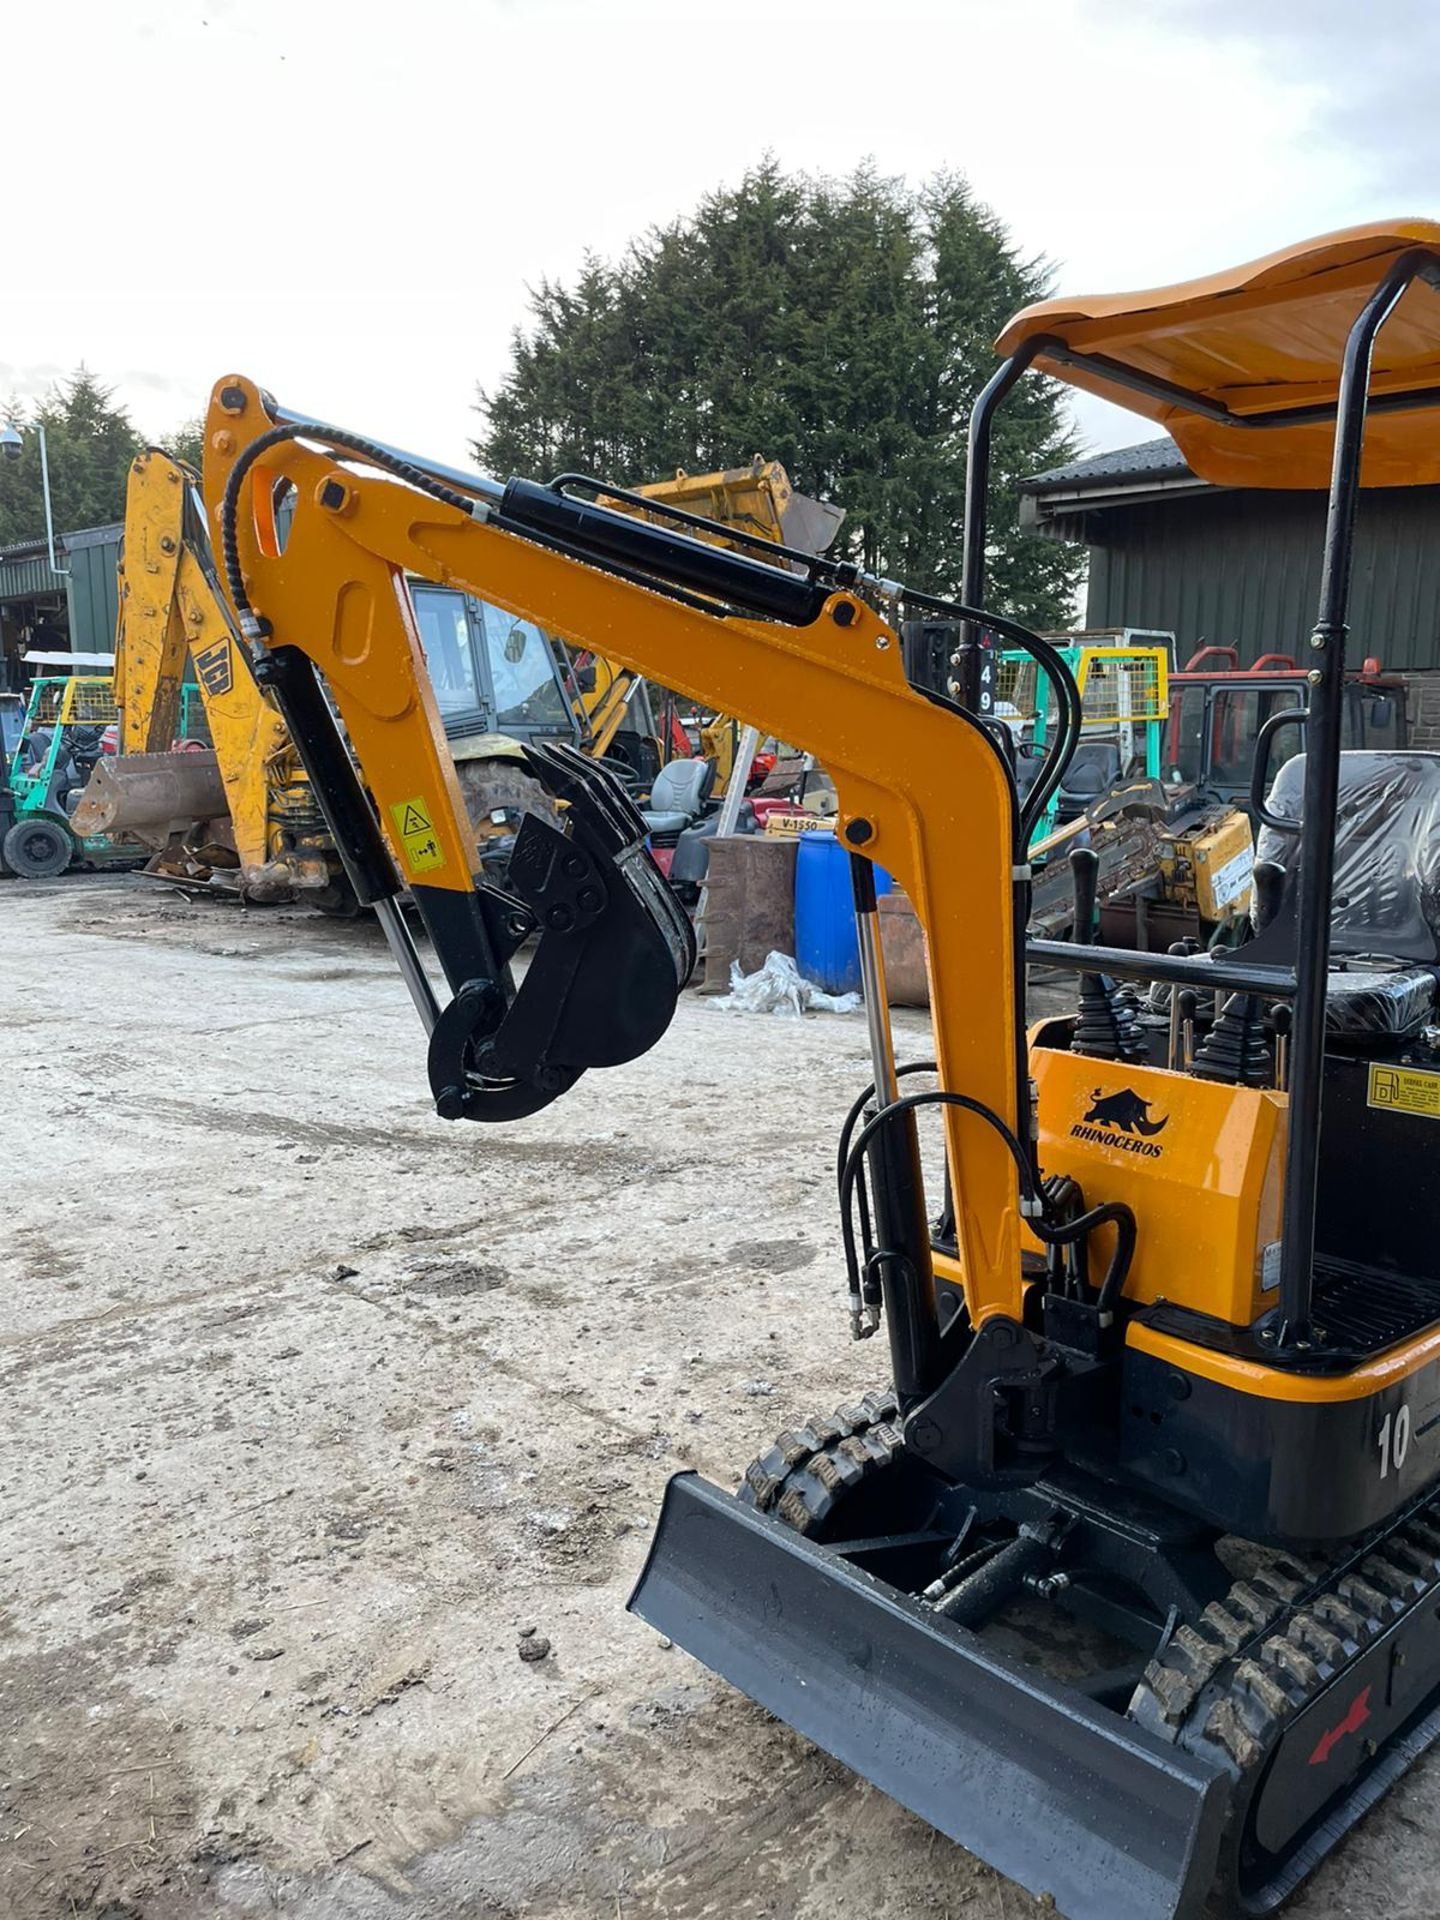 RHINOCEROS LM10 MINI RUBBER TRACKED DIGGER / EXCAVATOR, BRAND NEW AND UNUSED 3 X BUCKETS *PLUS VAT* - Image 2 of 10